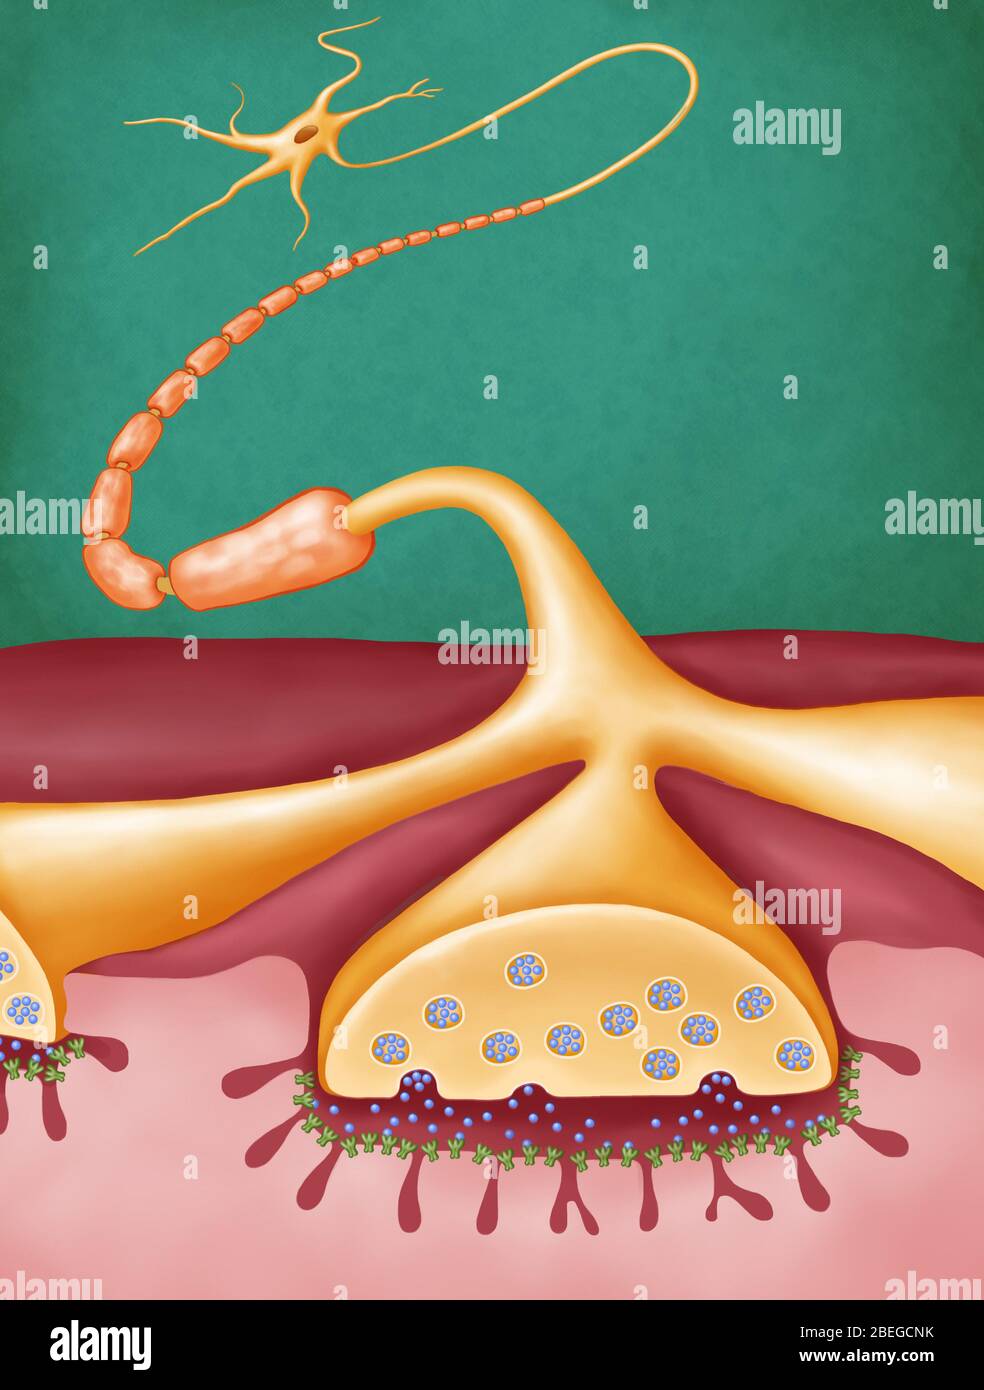 Neuromuscular Synapse, Healthy, 2D Illustration Stock Photo